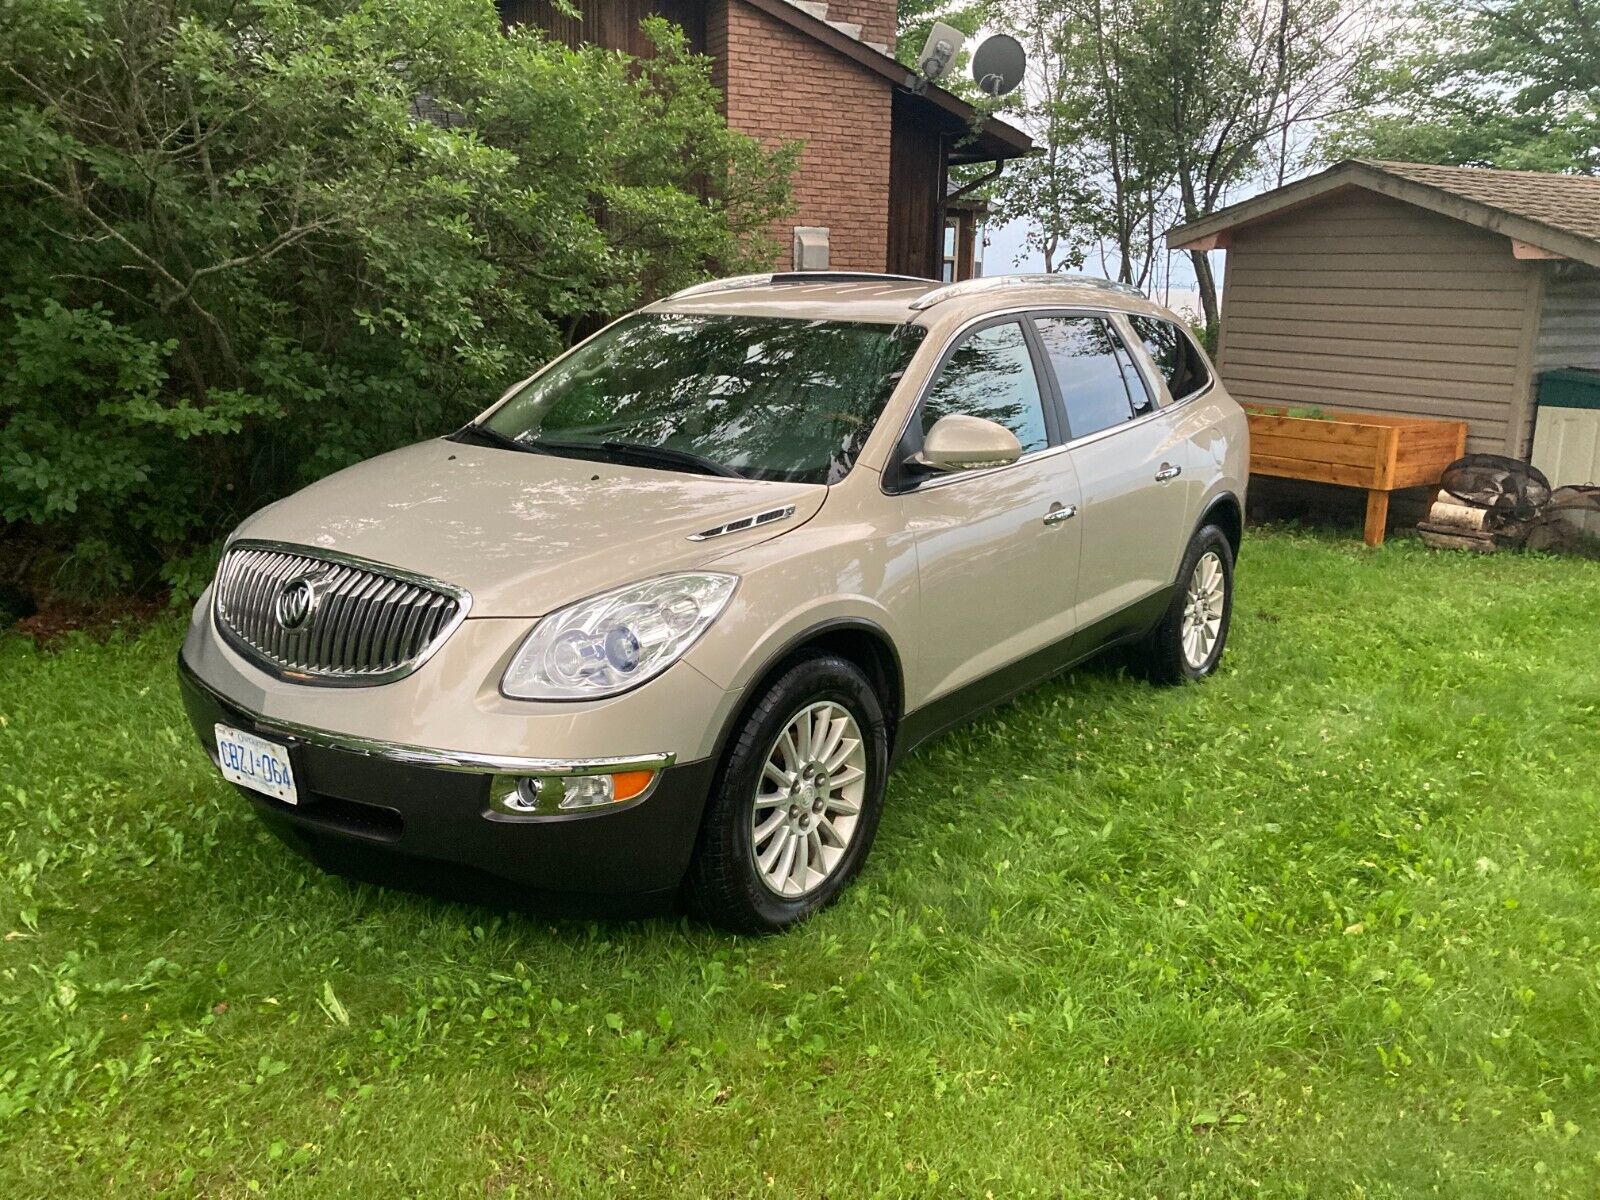 2012 Buick Enclave, Certified, New Tires, Gold, AWD, Power, Heated Seats